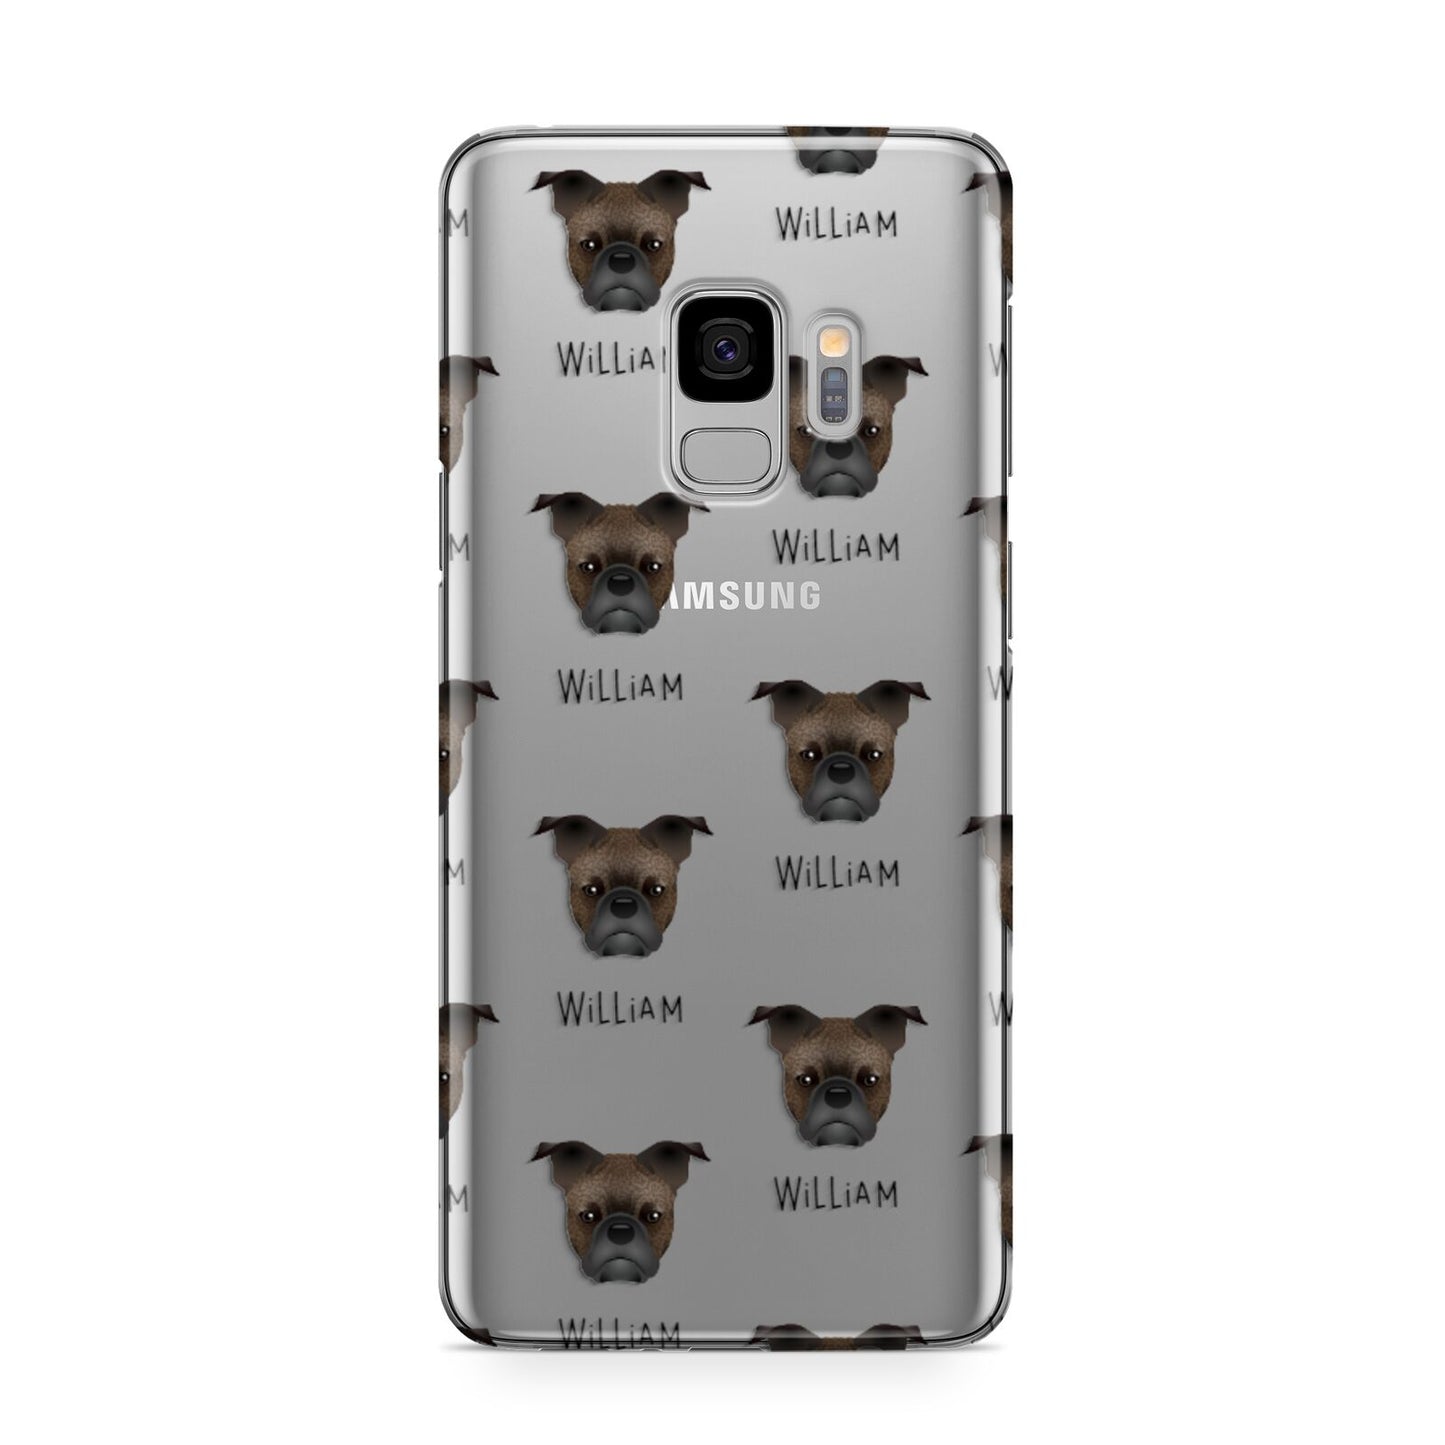 Frug Icon with Name Samsung Galaxy S9 Case